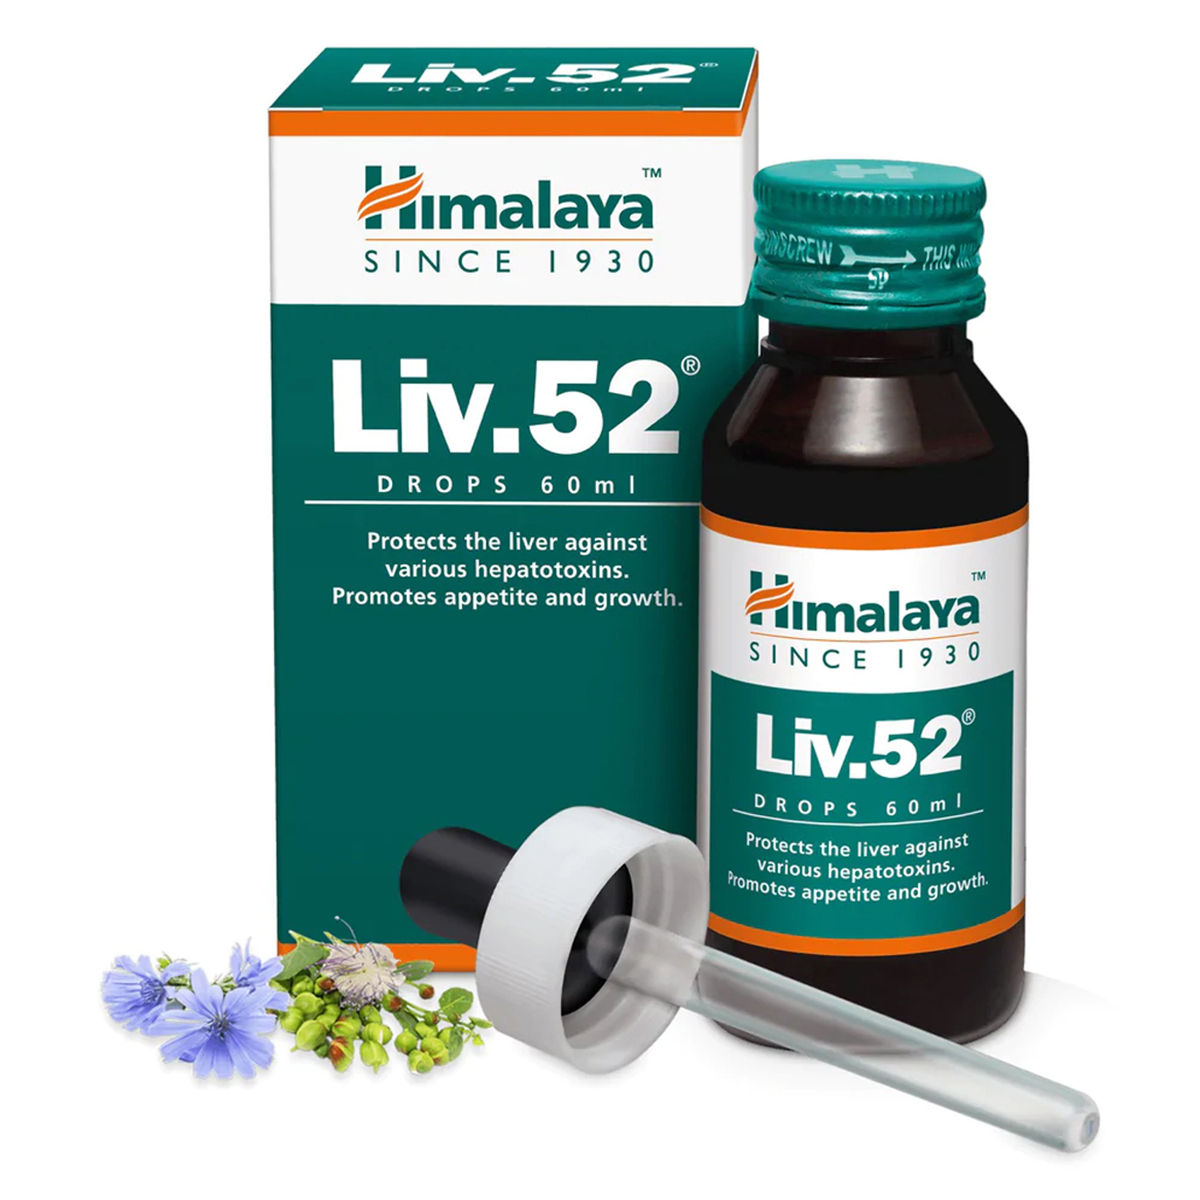 Himalaya Liv.52 Drops, 60 ml Price, Uses, Side Effects, Composition -  Apollo Pharmacy